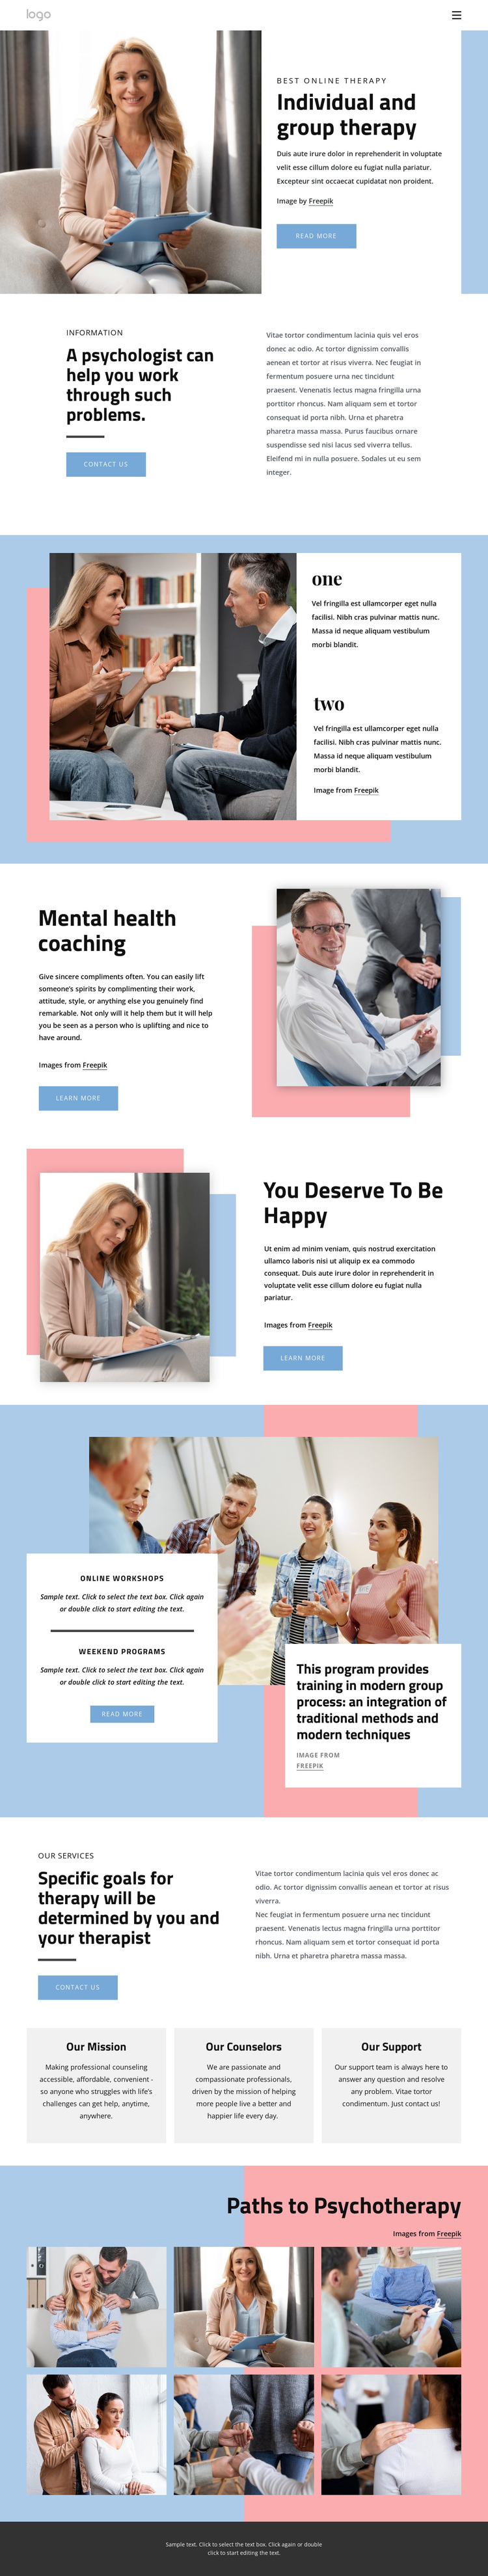 Undividual and group therapy Joomla Page Builder